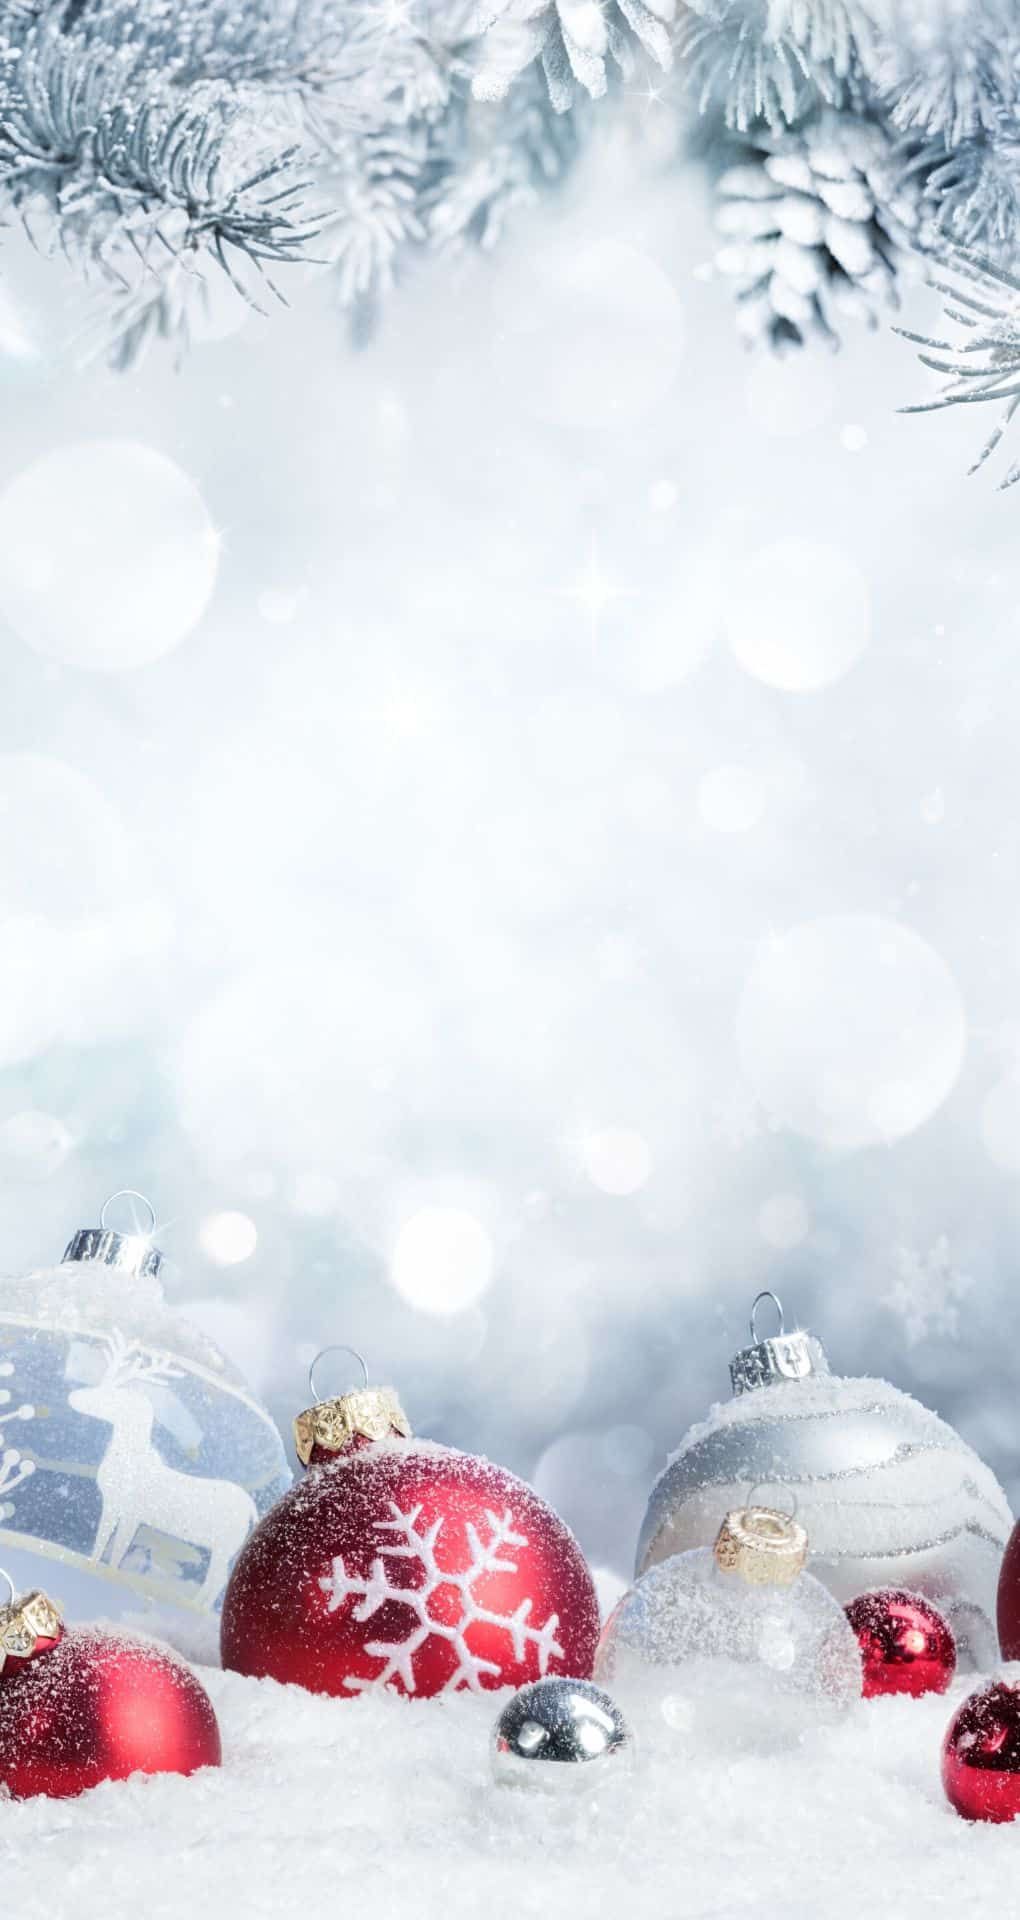 FREE WALLPAPER FOR IPHONE | THE CHRISTMAS COLLECTION